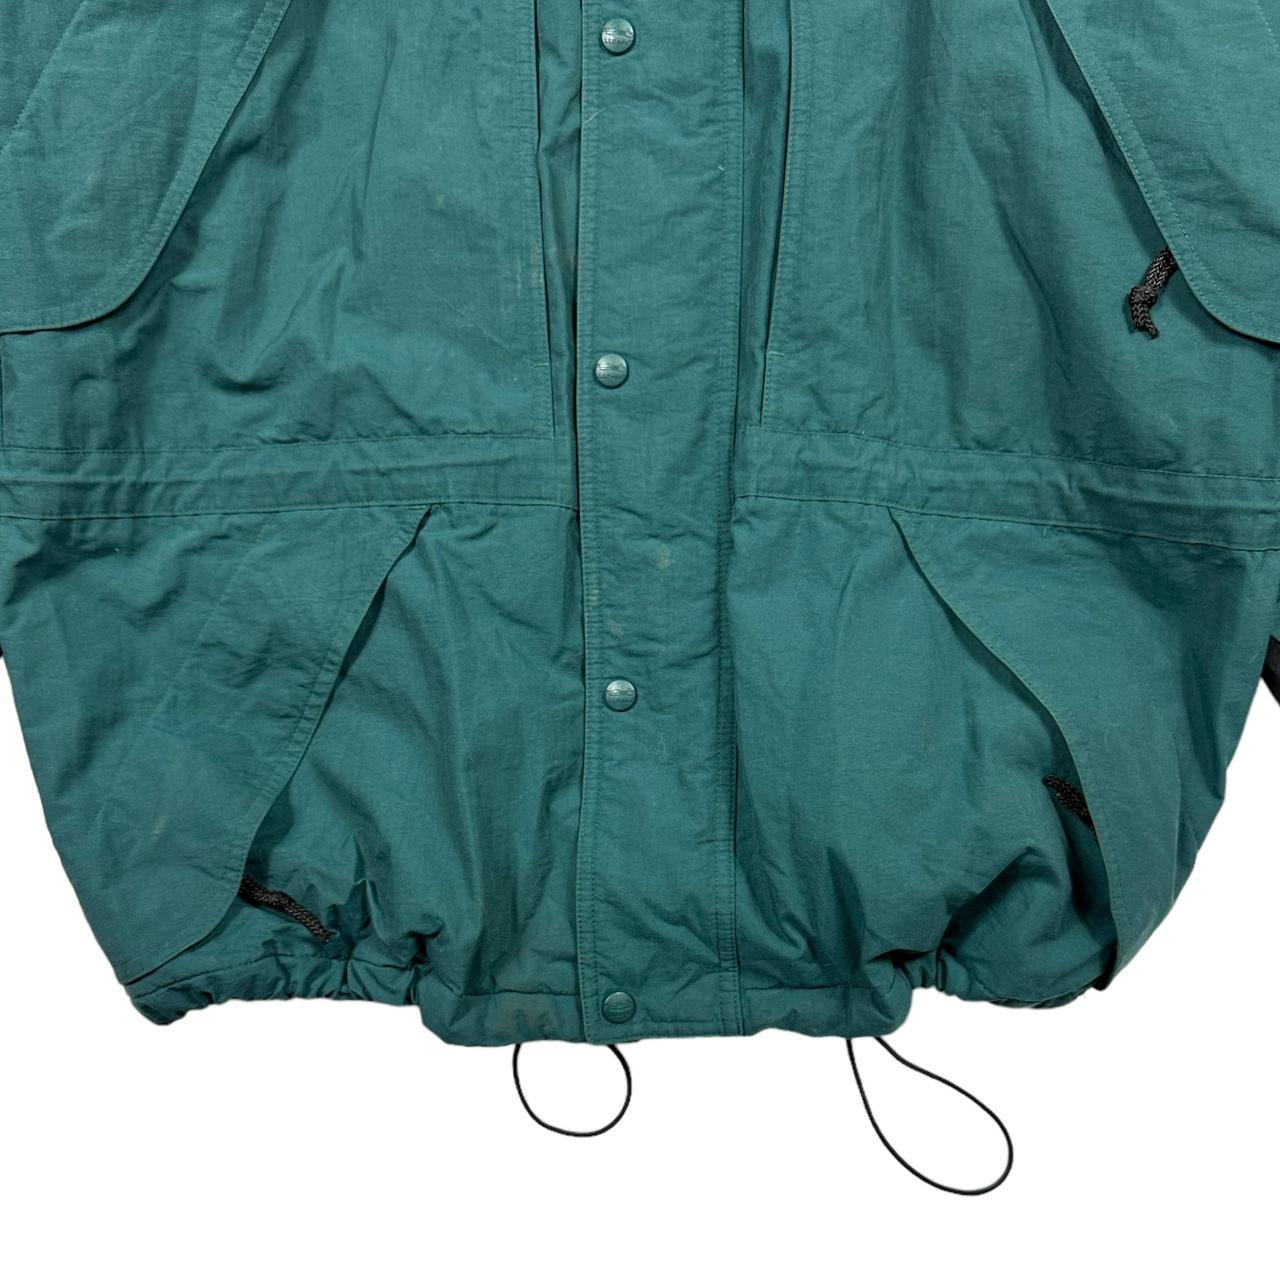 2000s L.L. Bean Green Outdoors Hooded Jacket